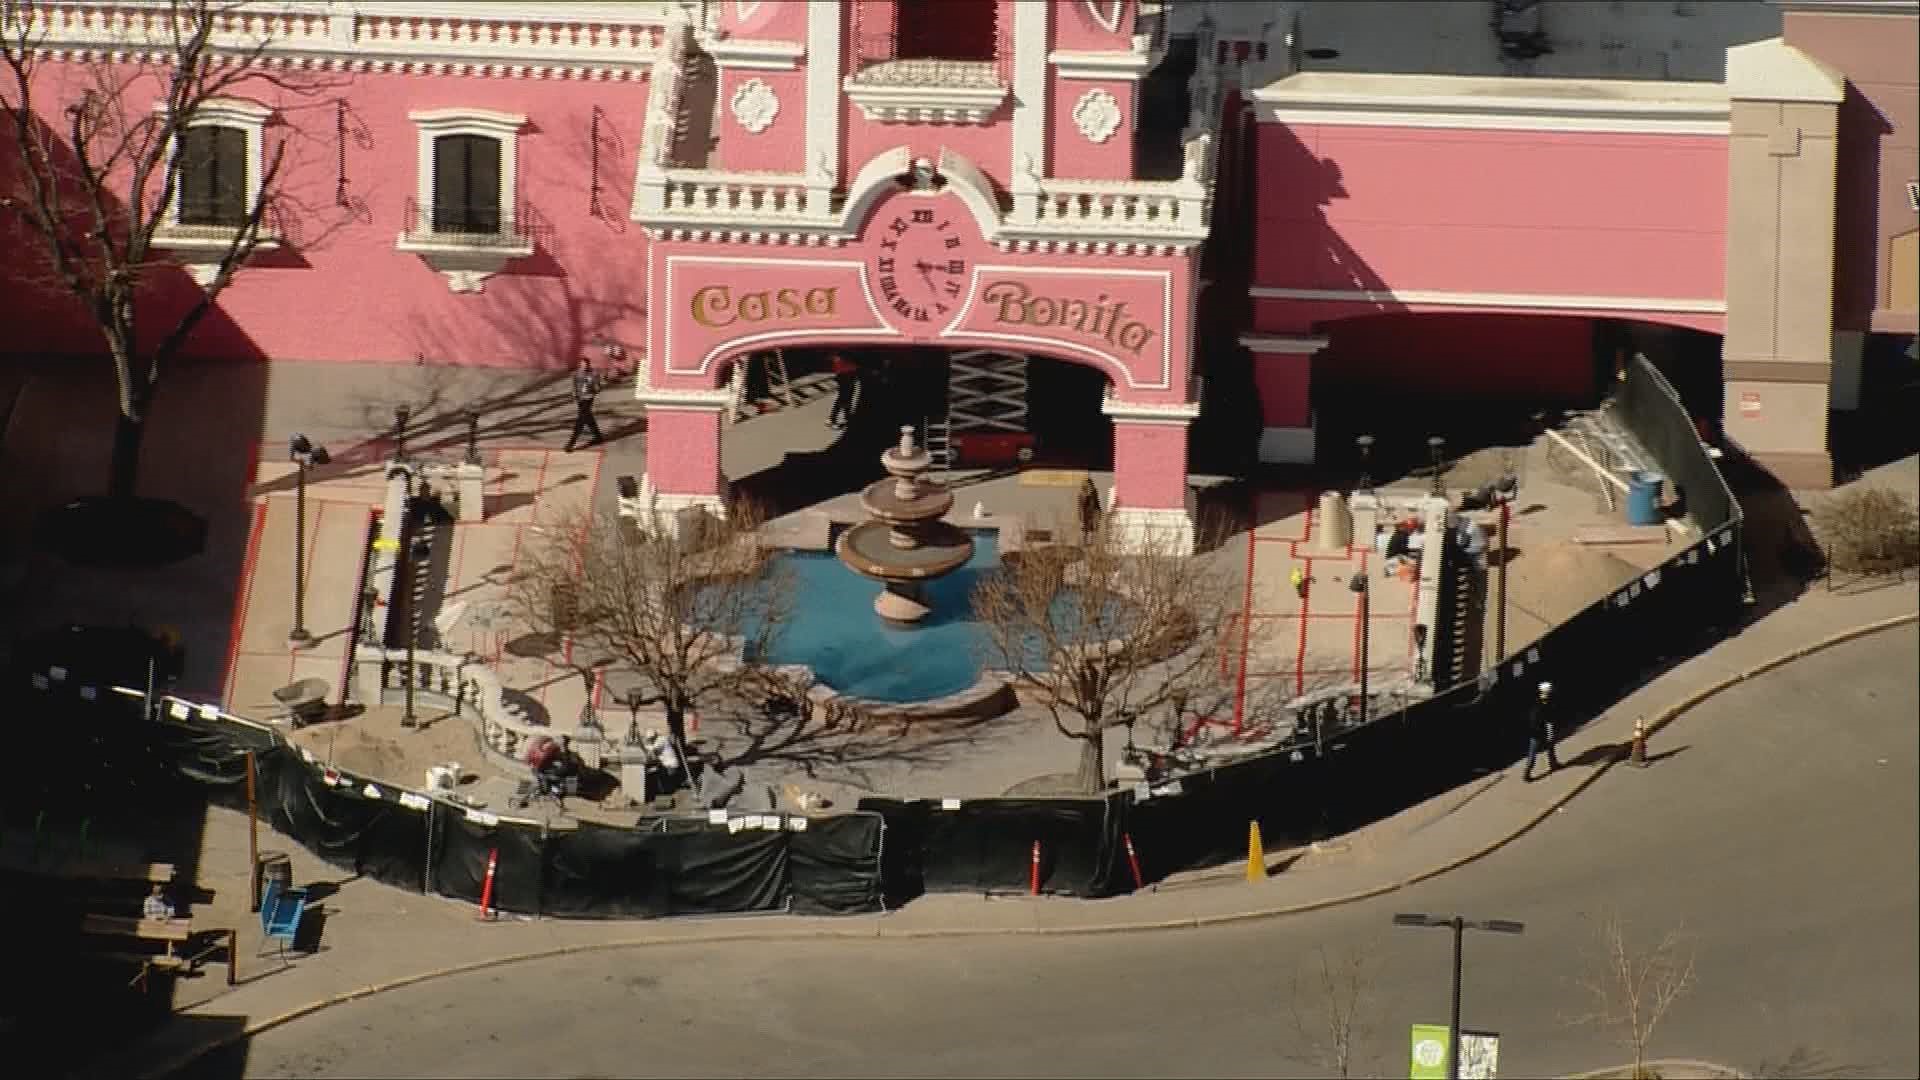 Weeks away from Casa Bonita's expected reopening, the iconic fountain in front of the Lakewood restaurant is once again filled with water.